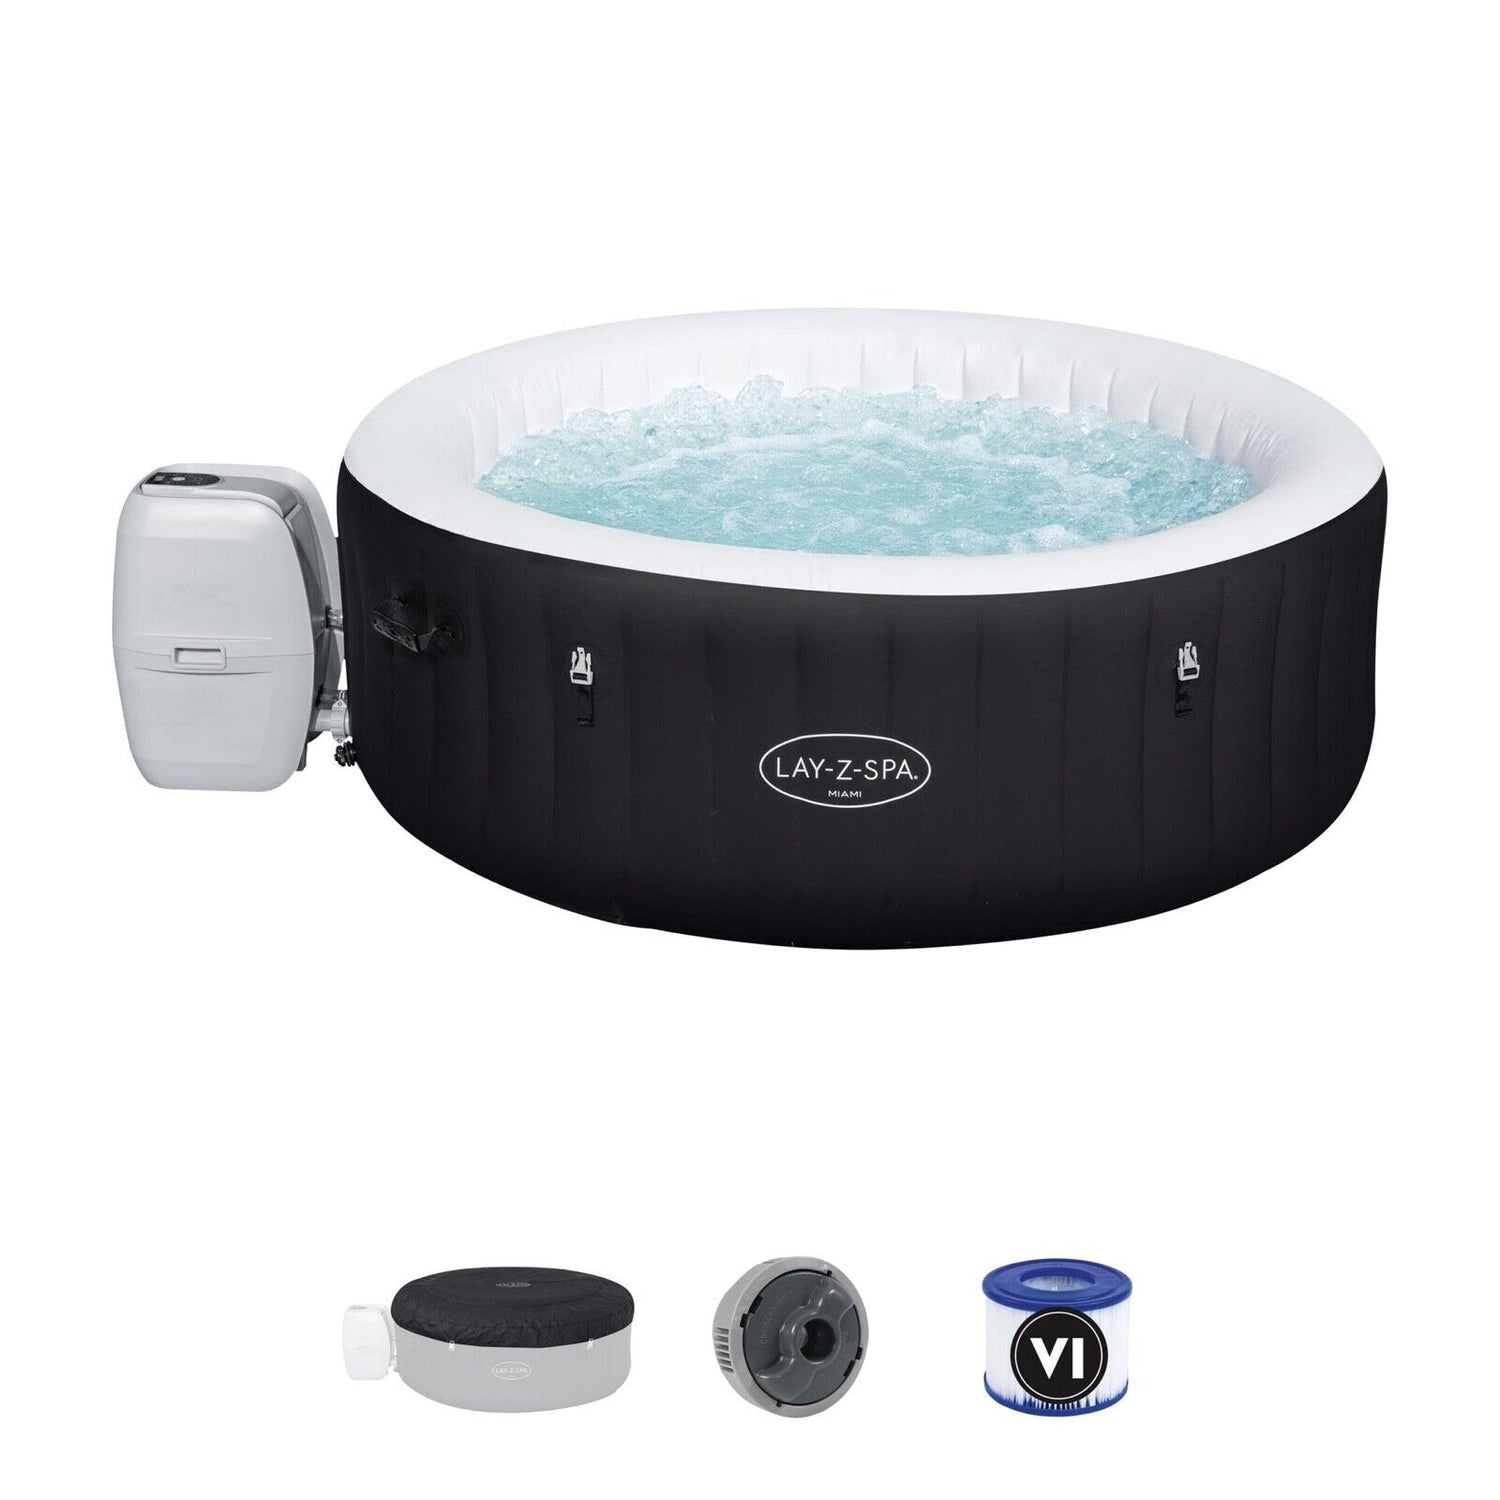 Miami Hot Tub Lay-Z-Spa 60001 AirJet Massage System Inflatable Spa 2-4 Person